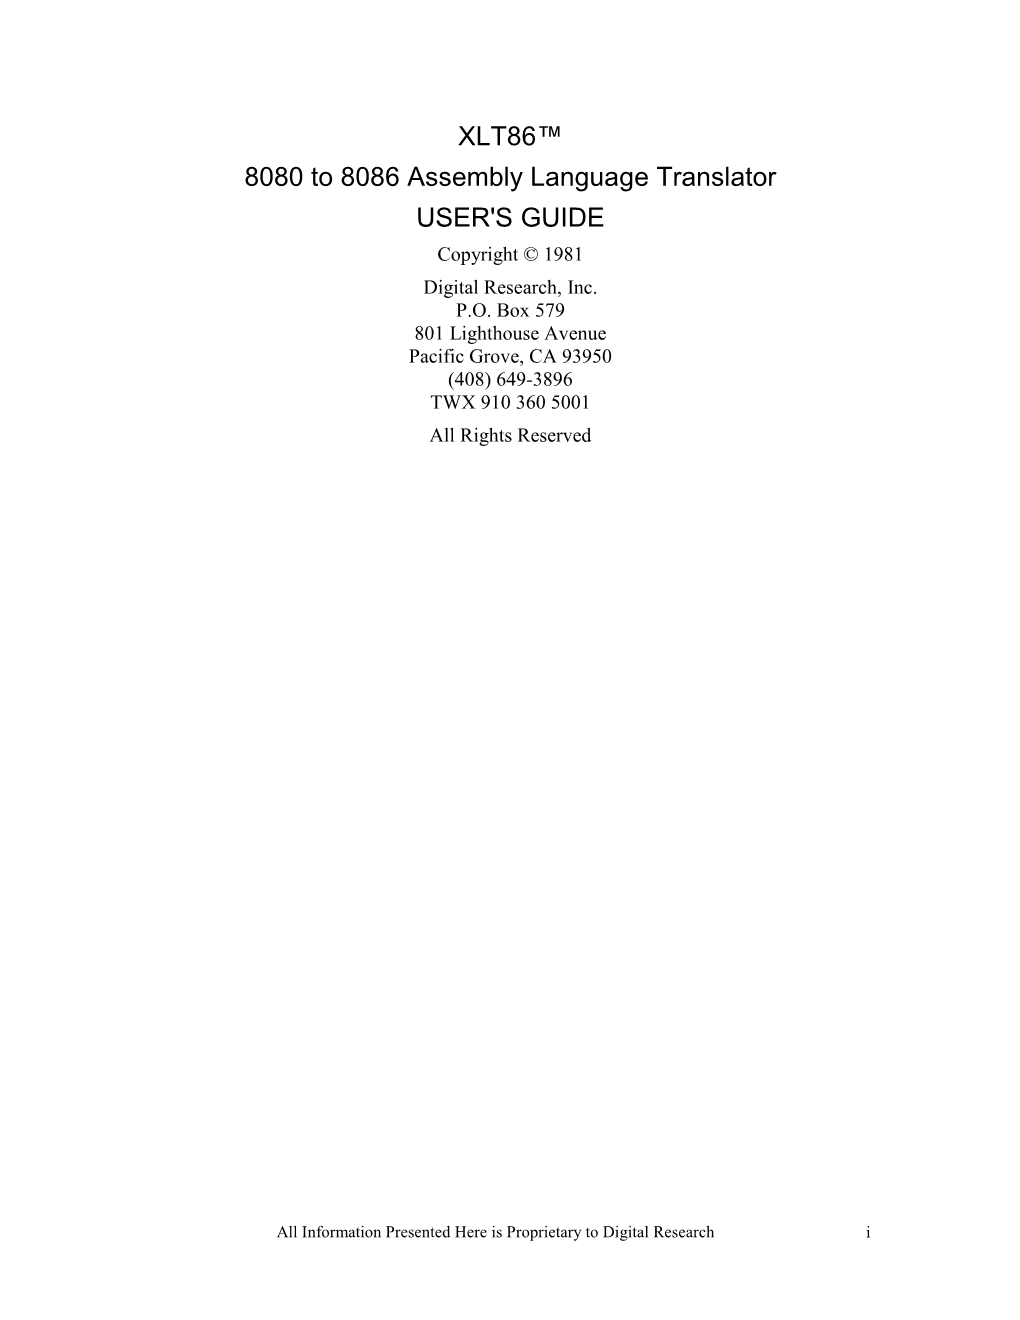 XLT86™ 8080 to 8086 Assembly Language Translator USER's GUIDE Copyright © 1981 Digital Research, Inc